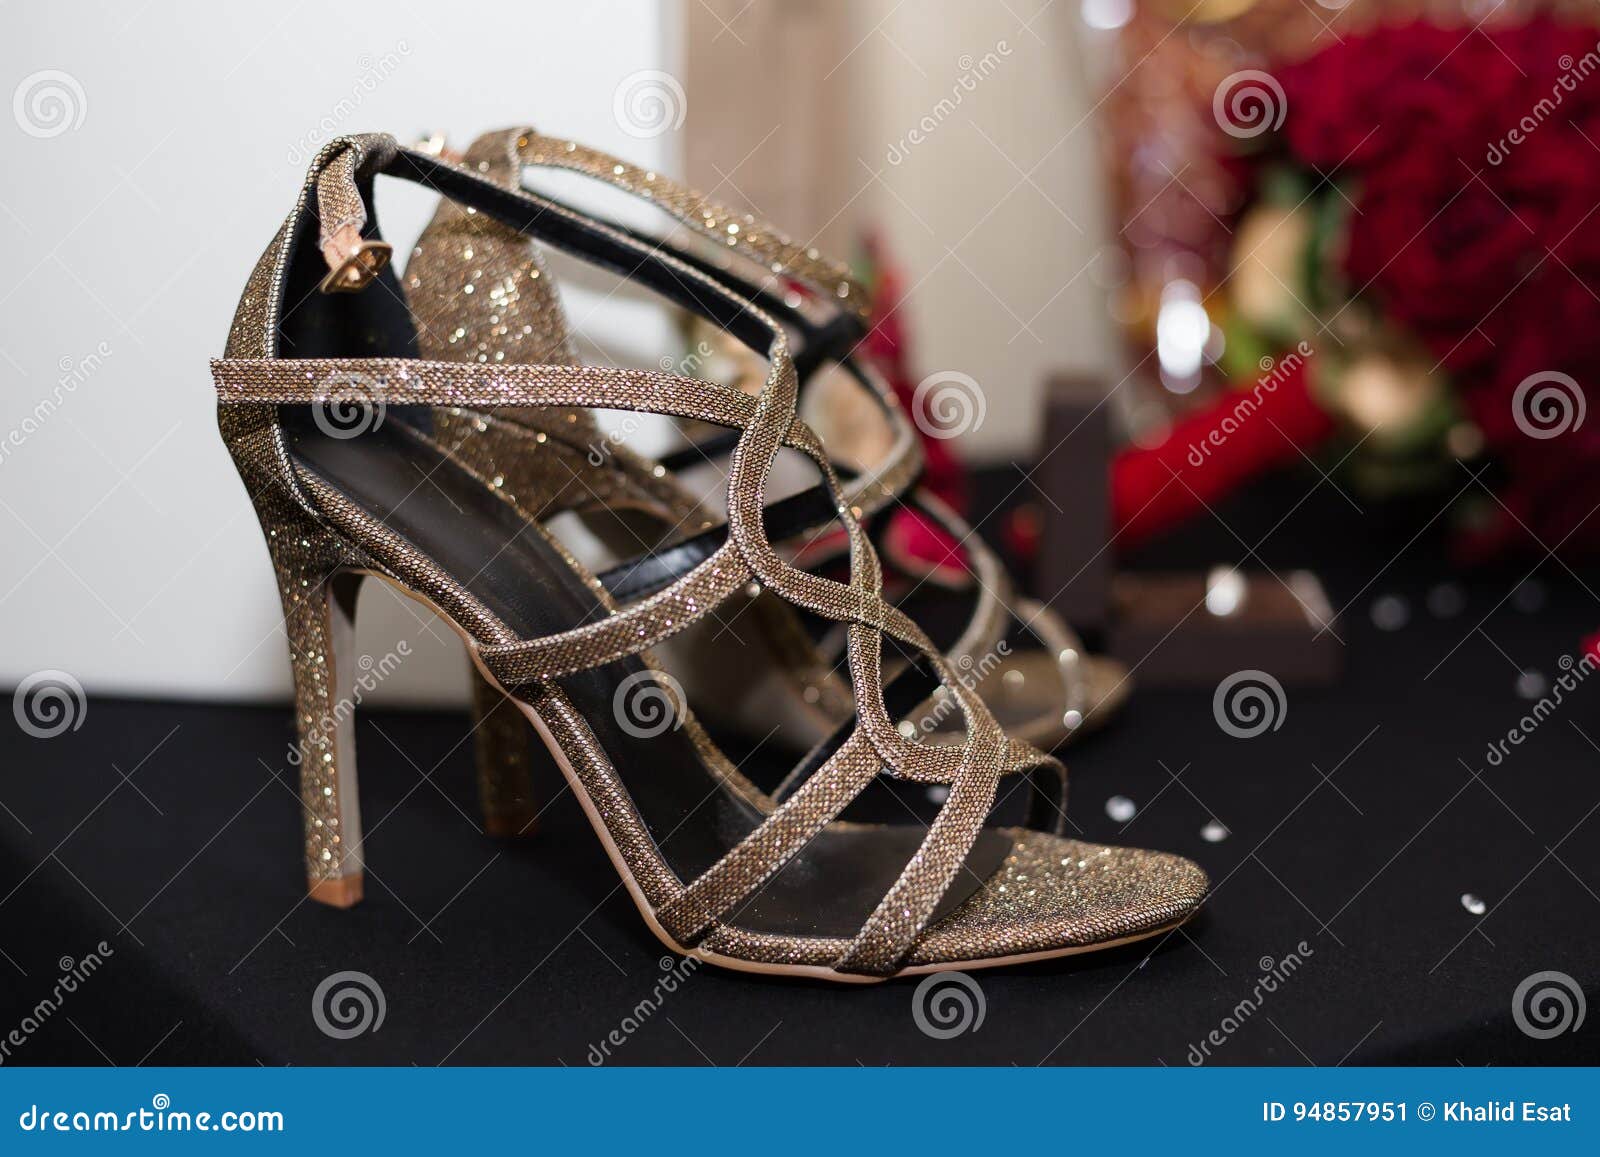 Indian-wedding-shoes | We manufacture & exporter of all type… | Flickr